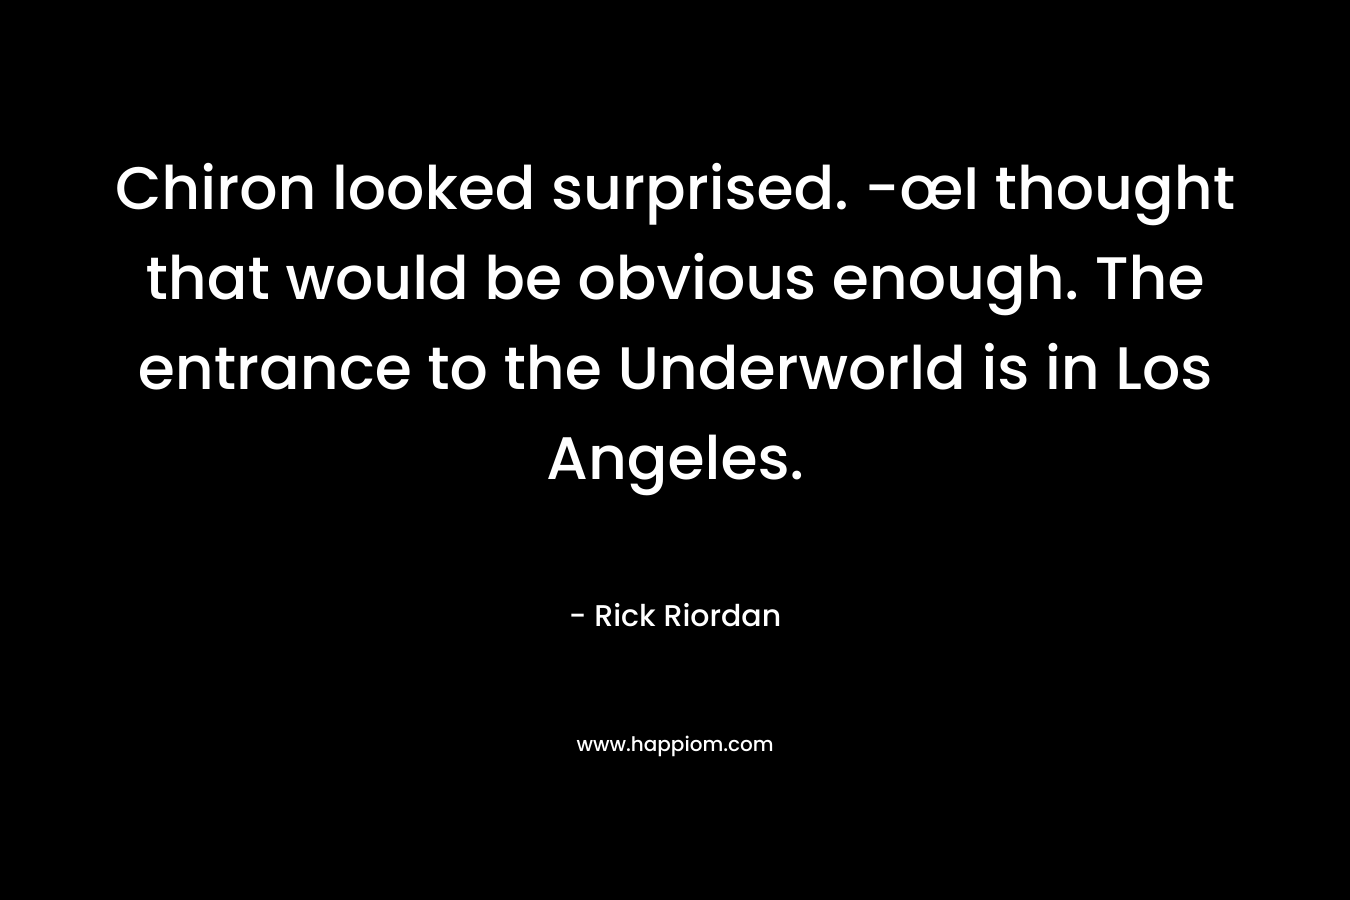 Chiron looked surprised. -œI thought that would be obvious enough. The entrance to the Underworld is in Los Angeles. – Rick Riordan